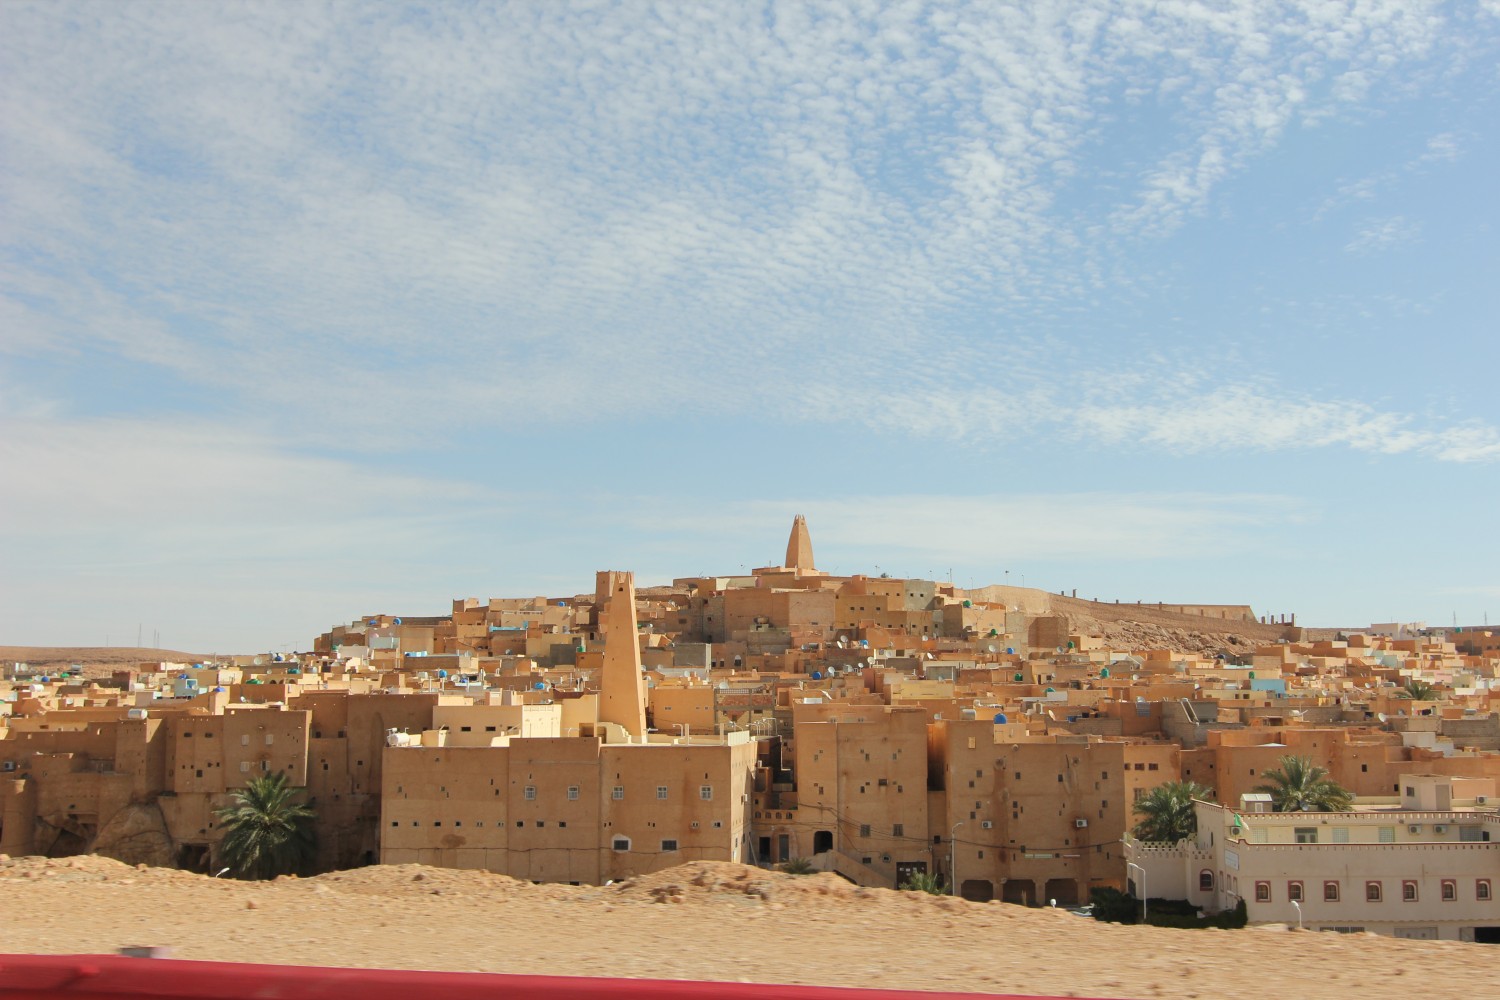 Bou Noura, general view of the qsar from south showing